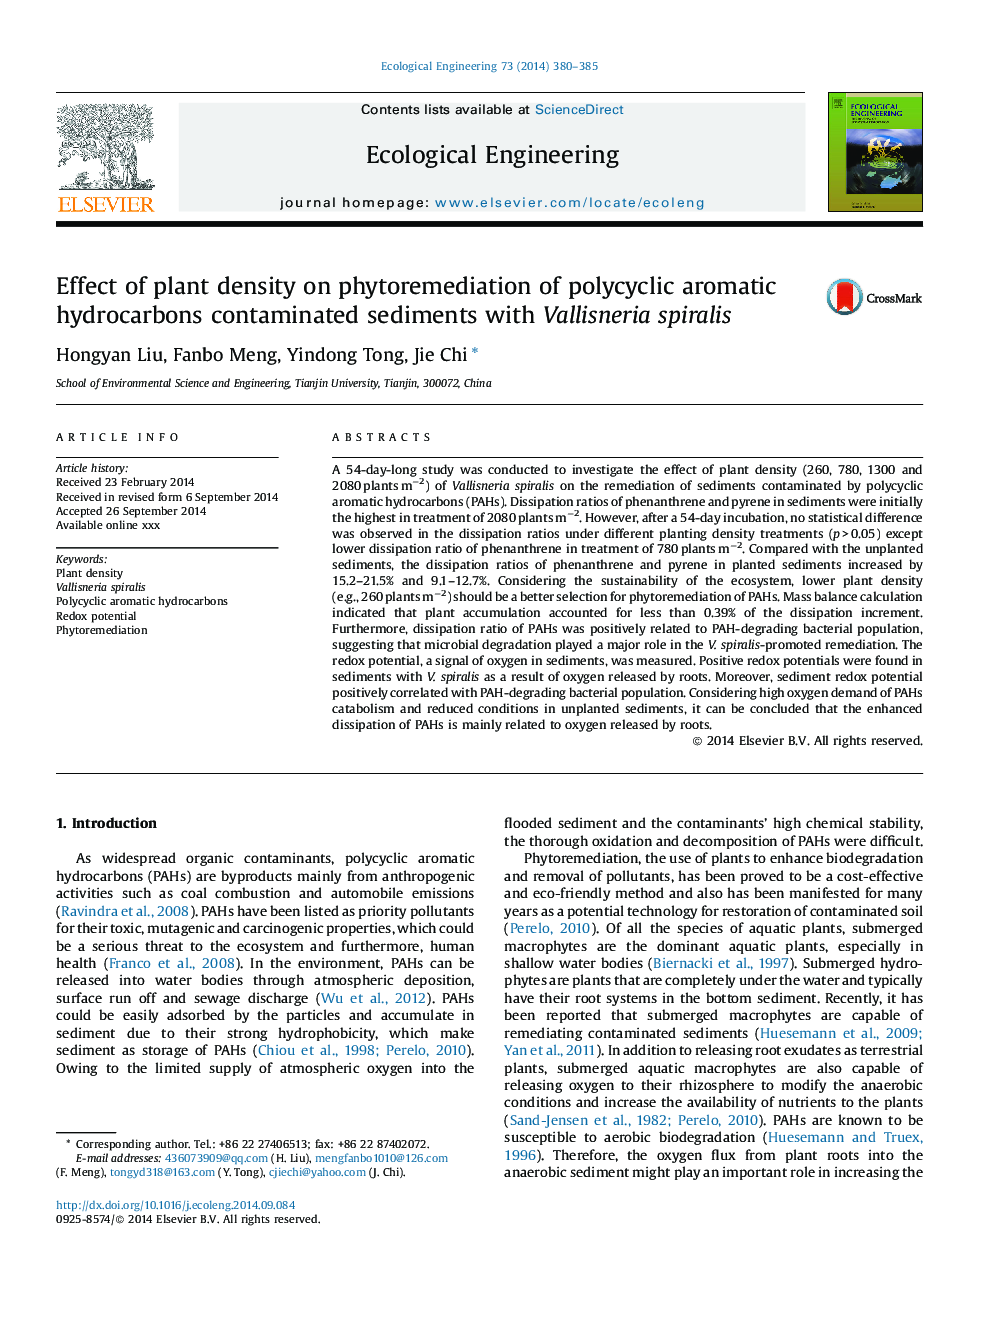 Effect of plant density on phytoremediation of polycyclic aromatic hydrocarbons contaminated sediments with Vallisneria spiralis